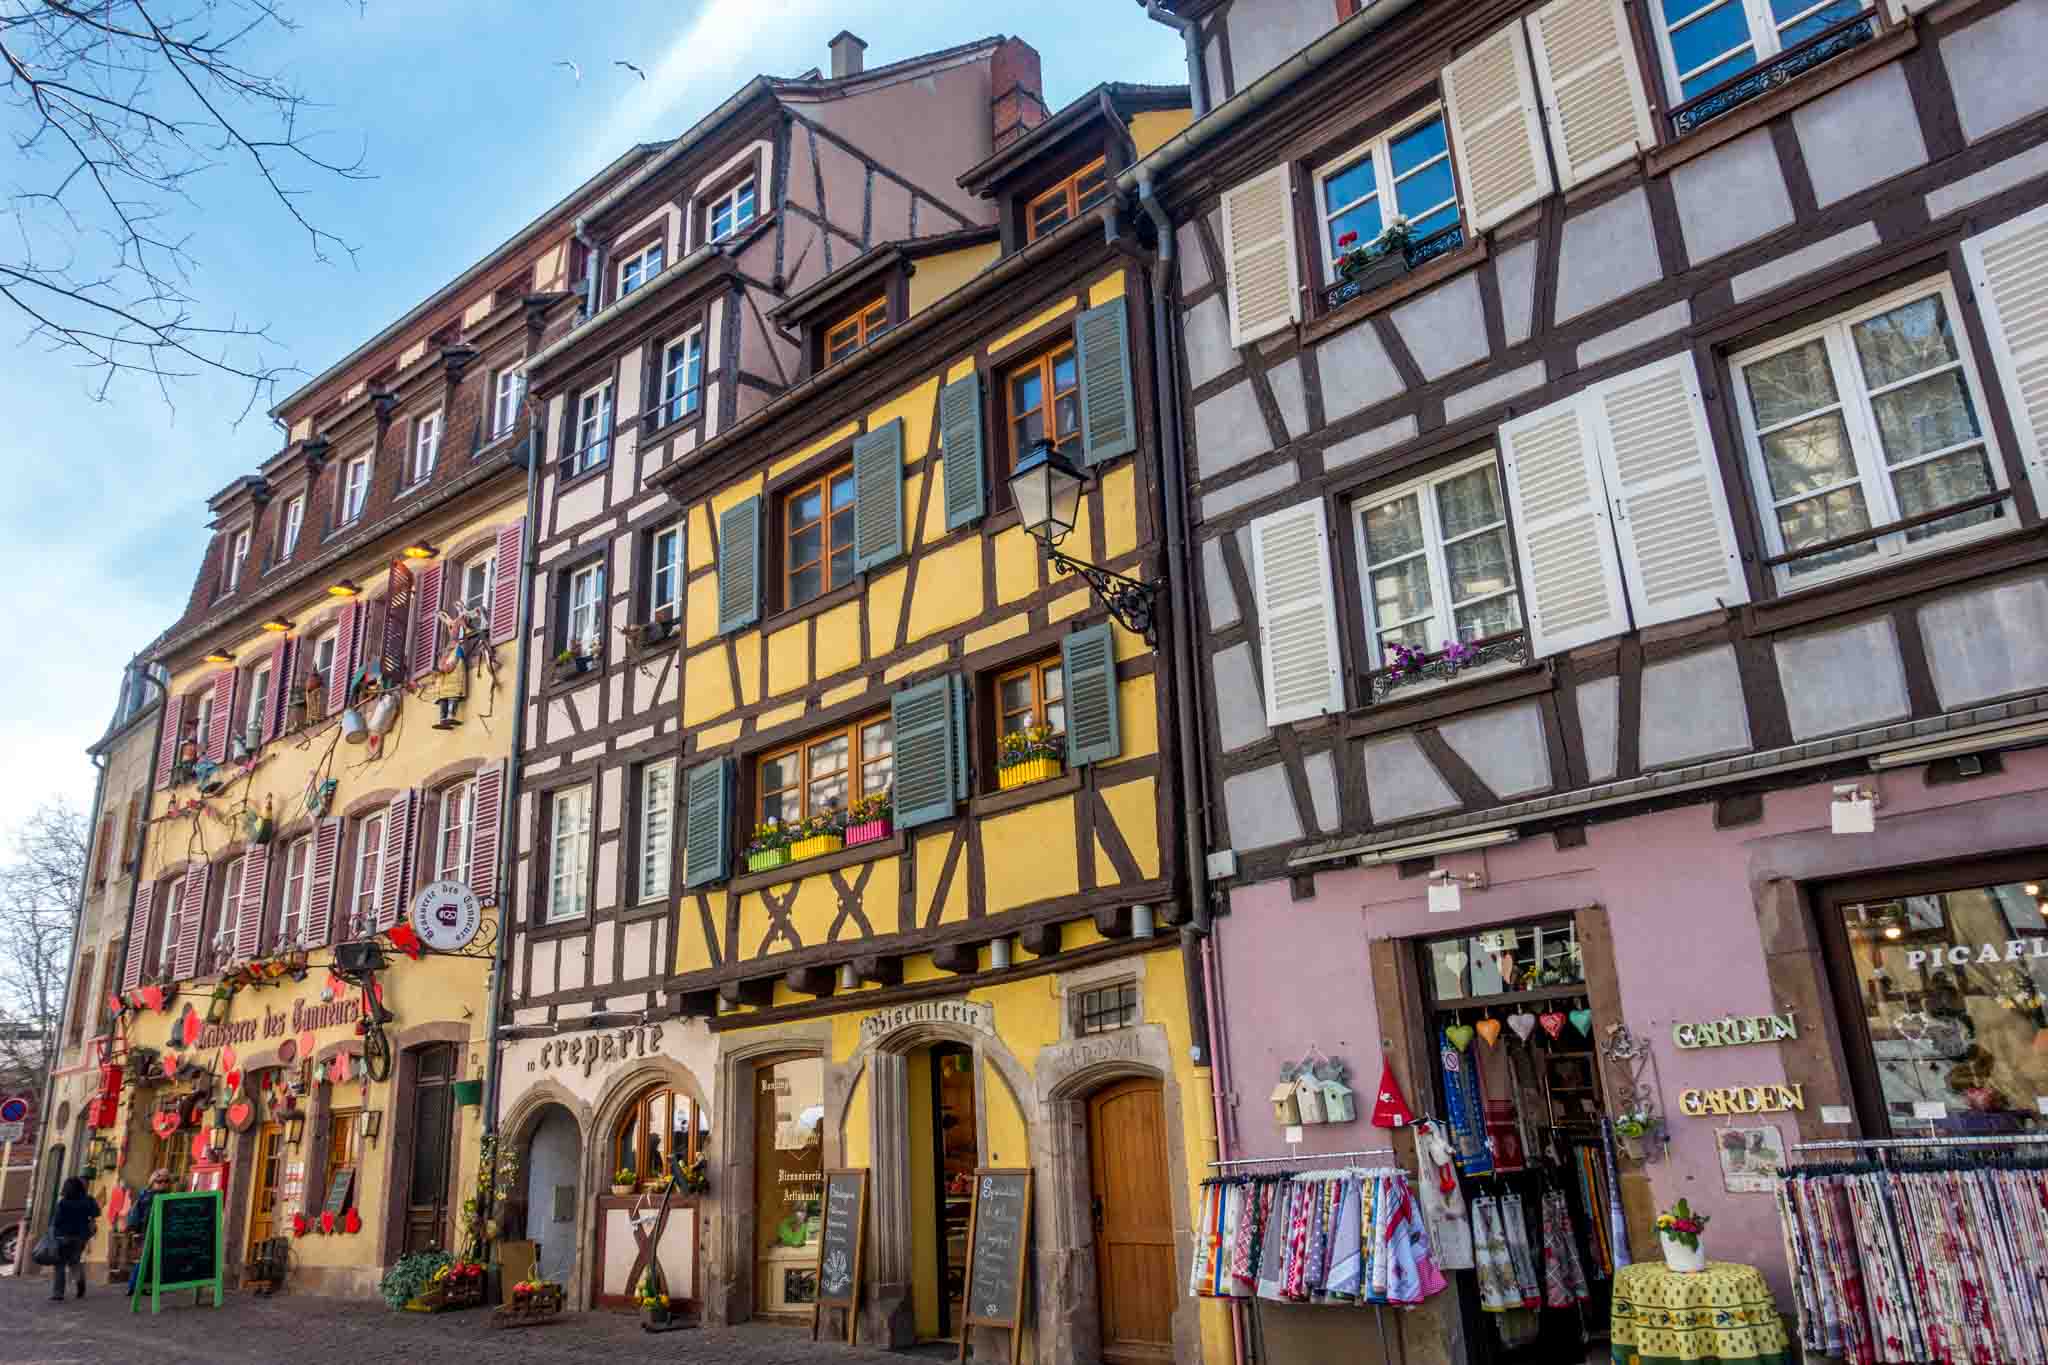 Half-timbered buildings housing shops and restaurants